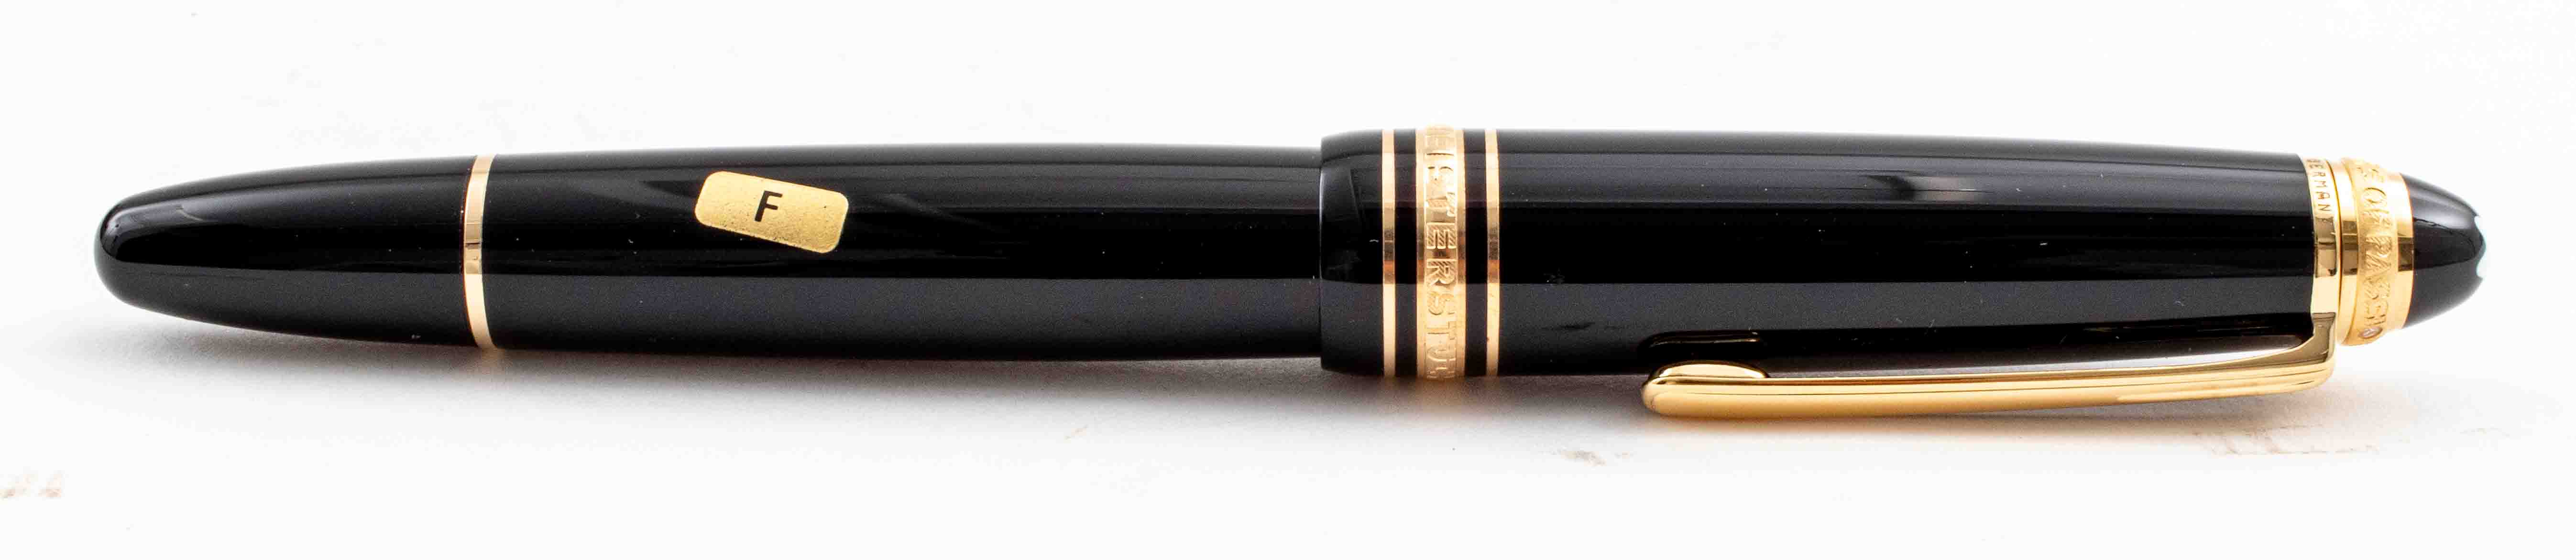 MONTBLANC SPECIAL ANNIVERSARY EDITION 2bba77